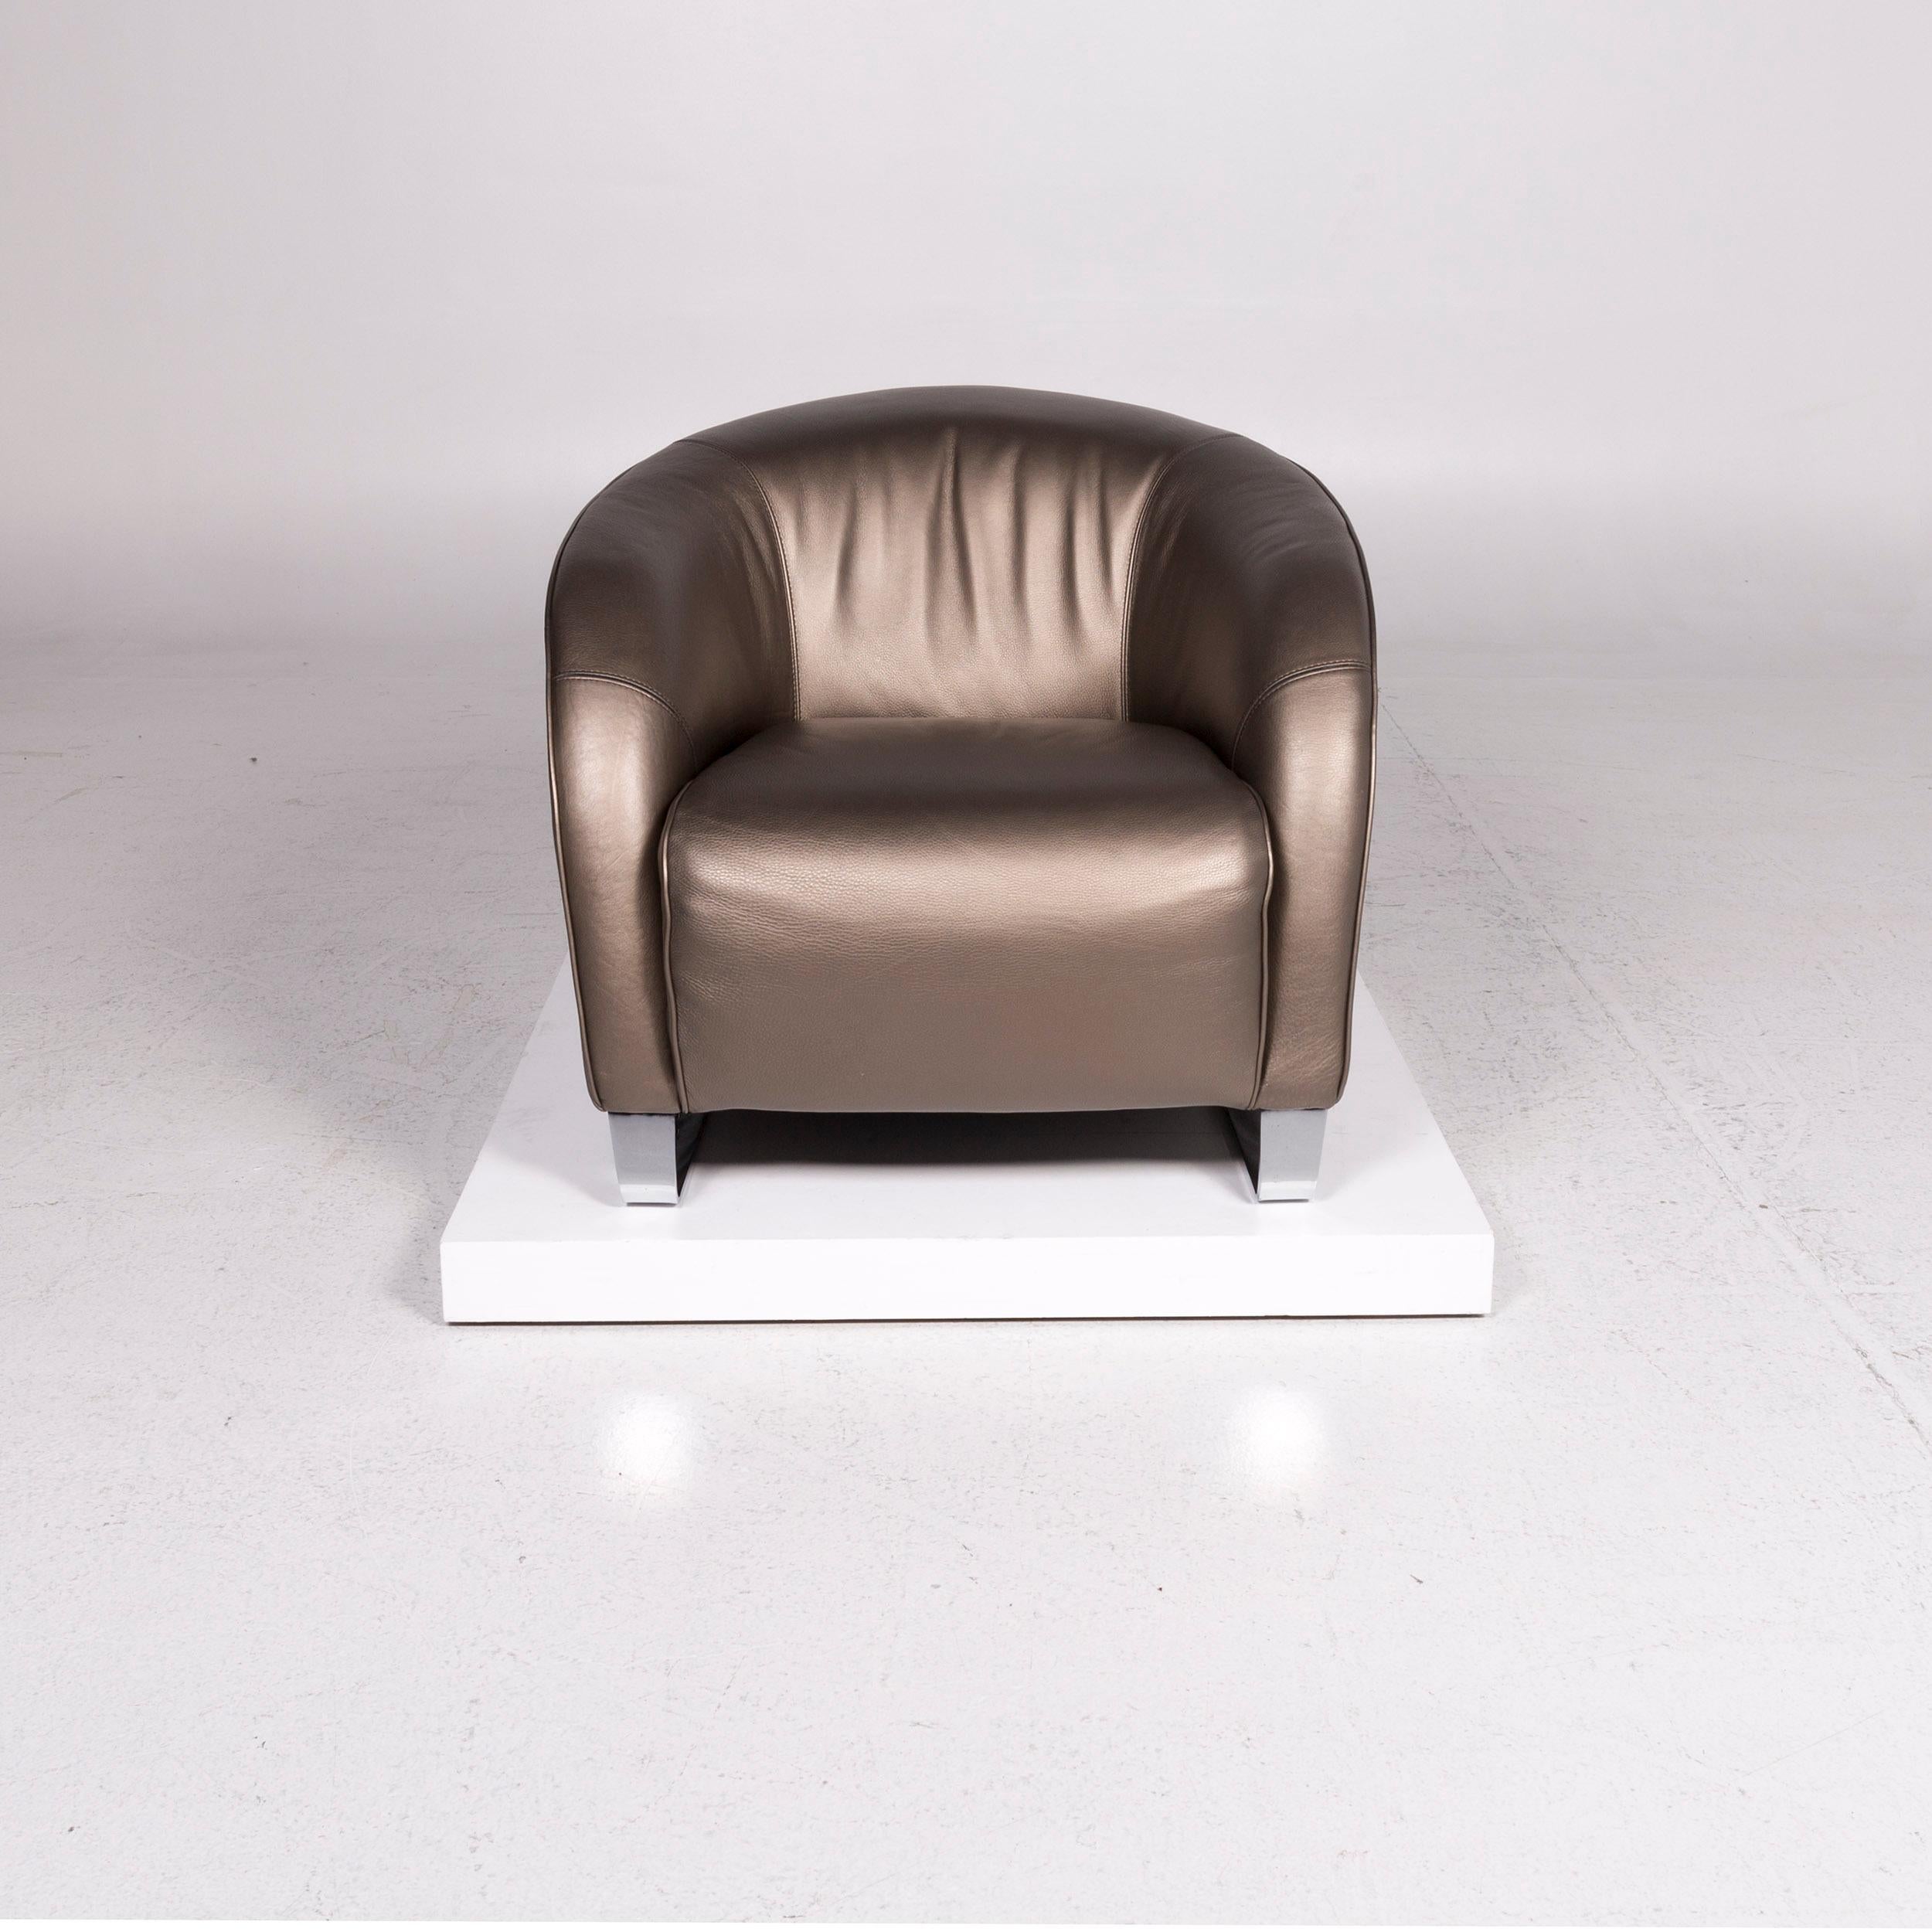 We bring to you a Natuzzi leather armchair bronze brown.
 

Product measurements in centimetres:
 

Depth 102
Width 84
Height 72
Seat-height 41
Rest-height 62
Seat-depth 63
Seat-width 50
Back-height 32.
 